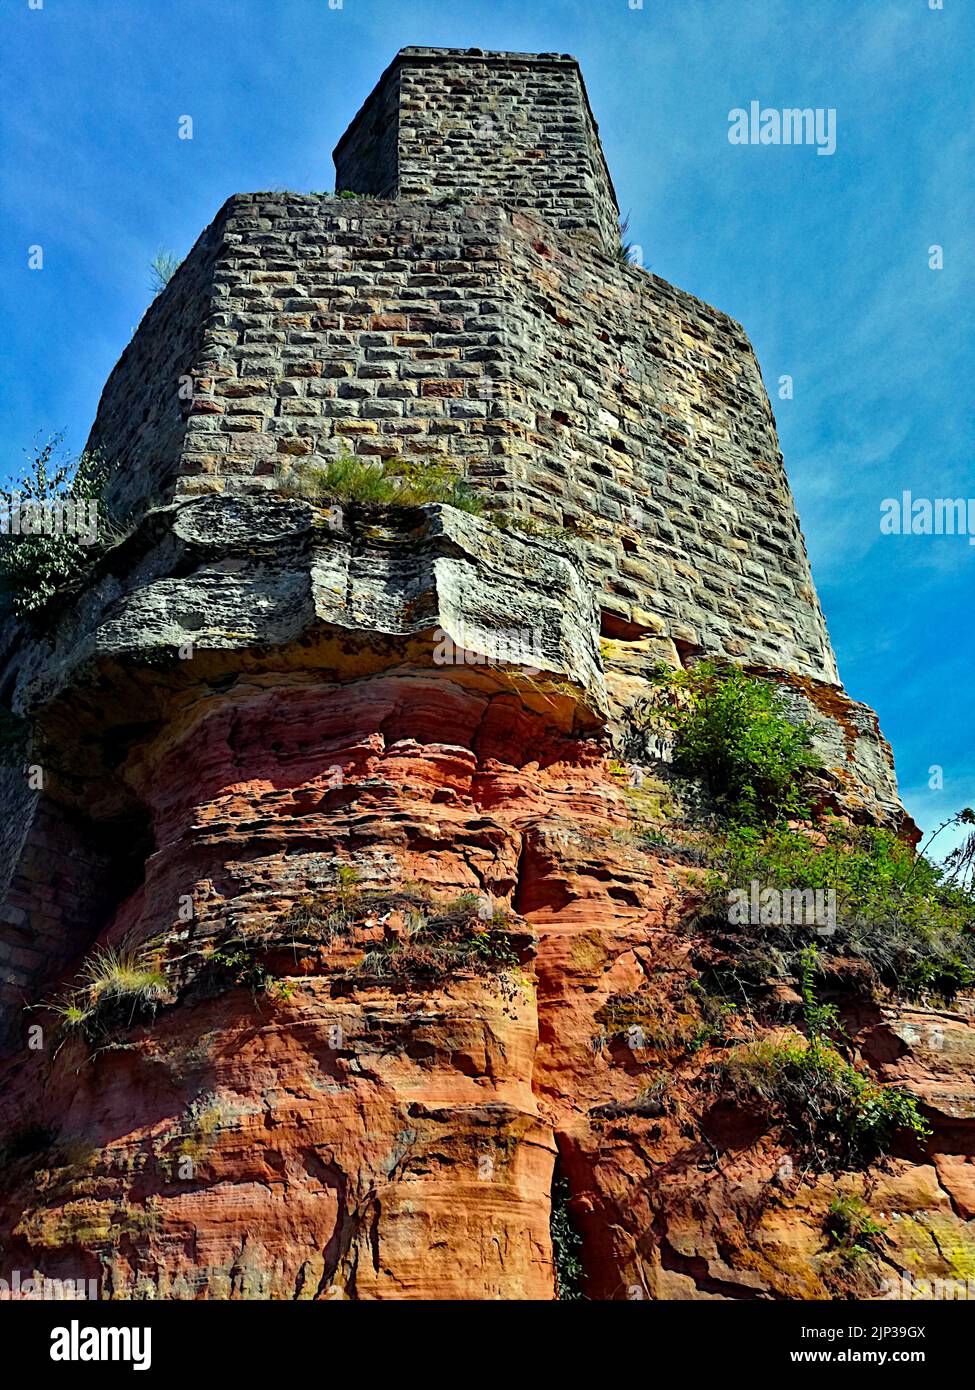 A low angle shot of Grafenstein castle in Merzalben, Germany Stock Photo